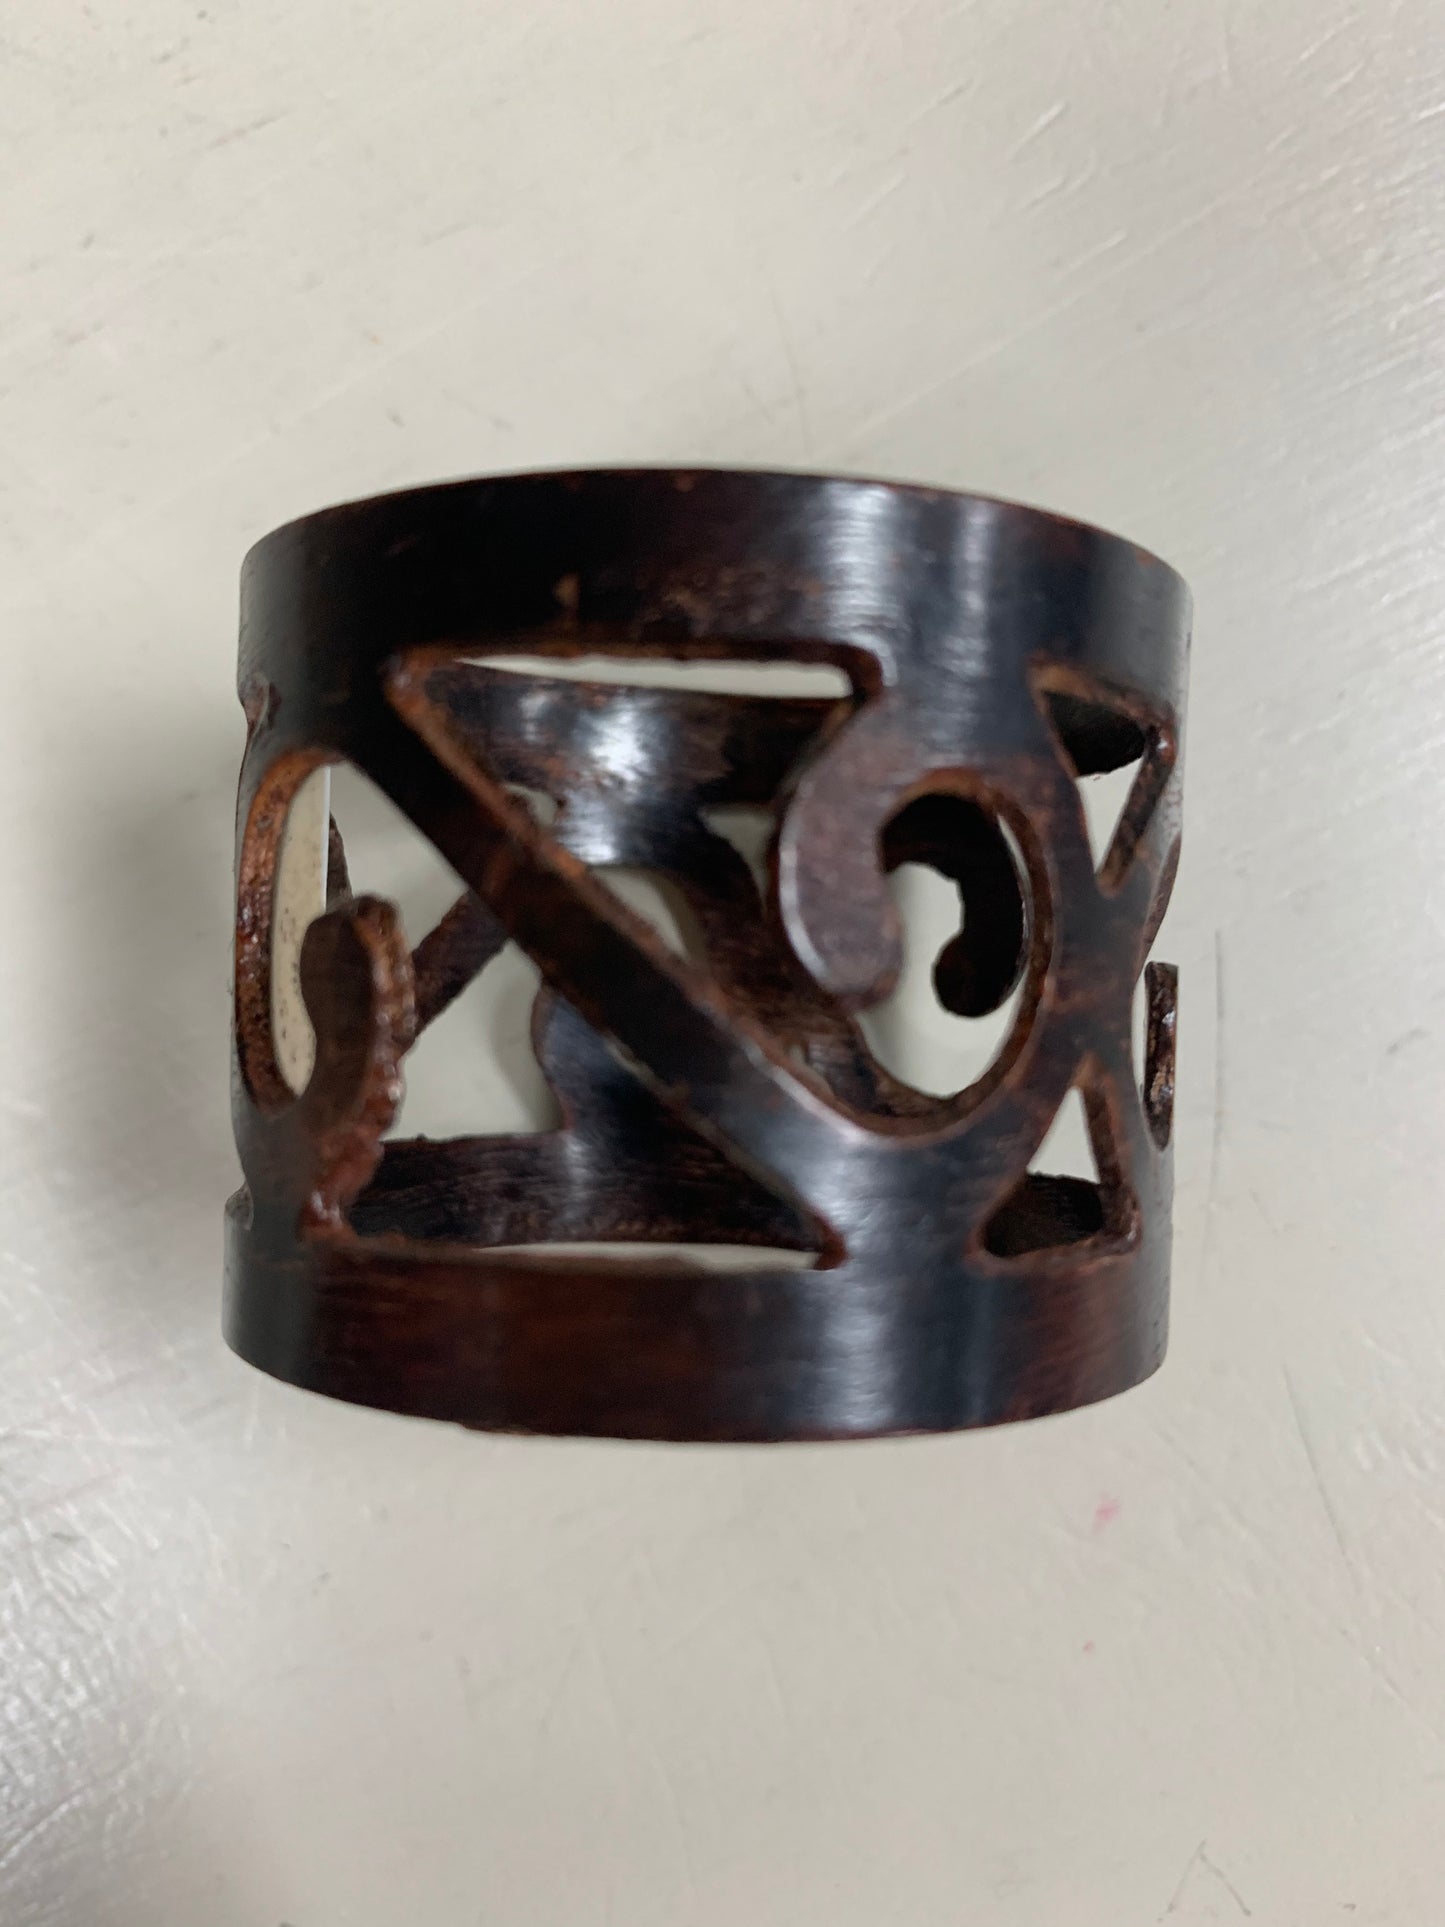 napkin ring with scroll pattern and a bronze finish.